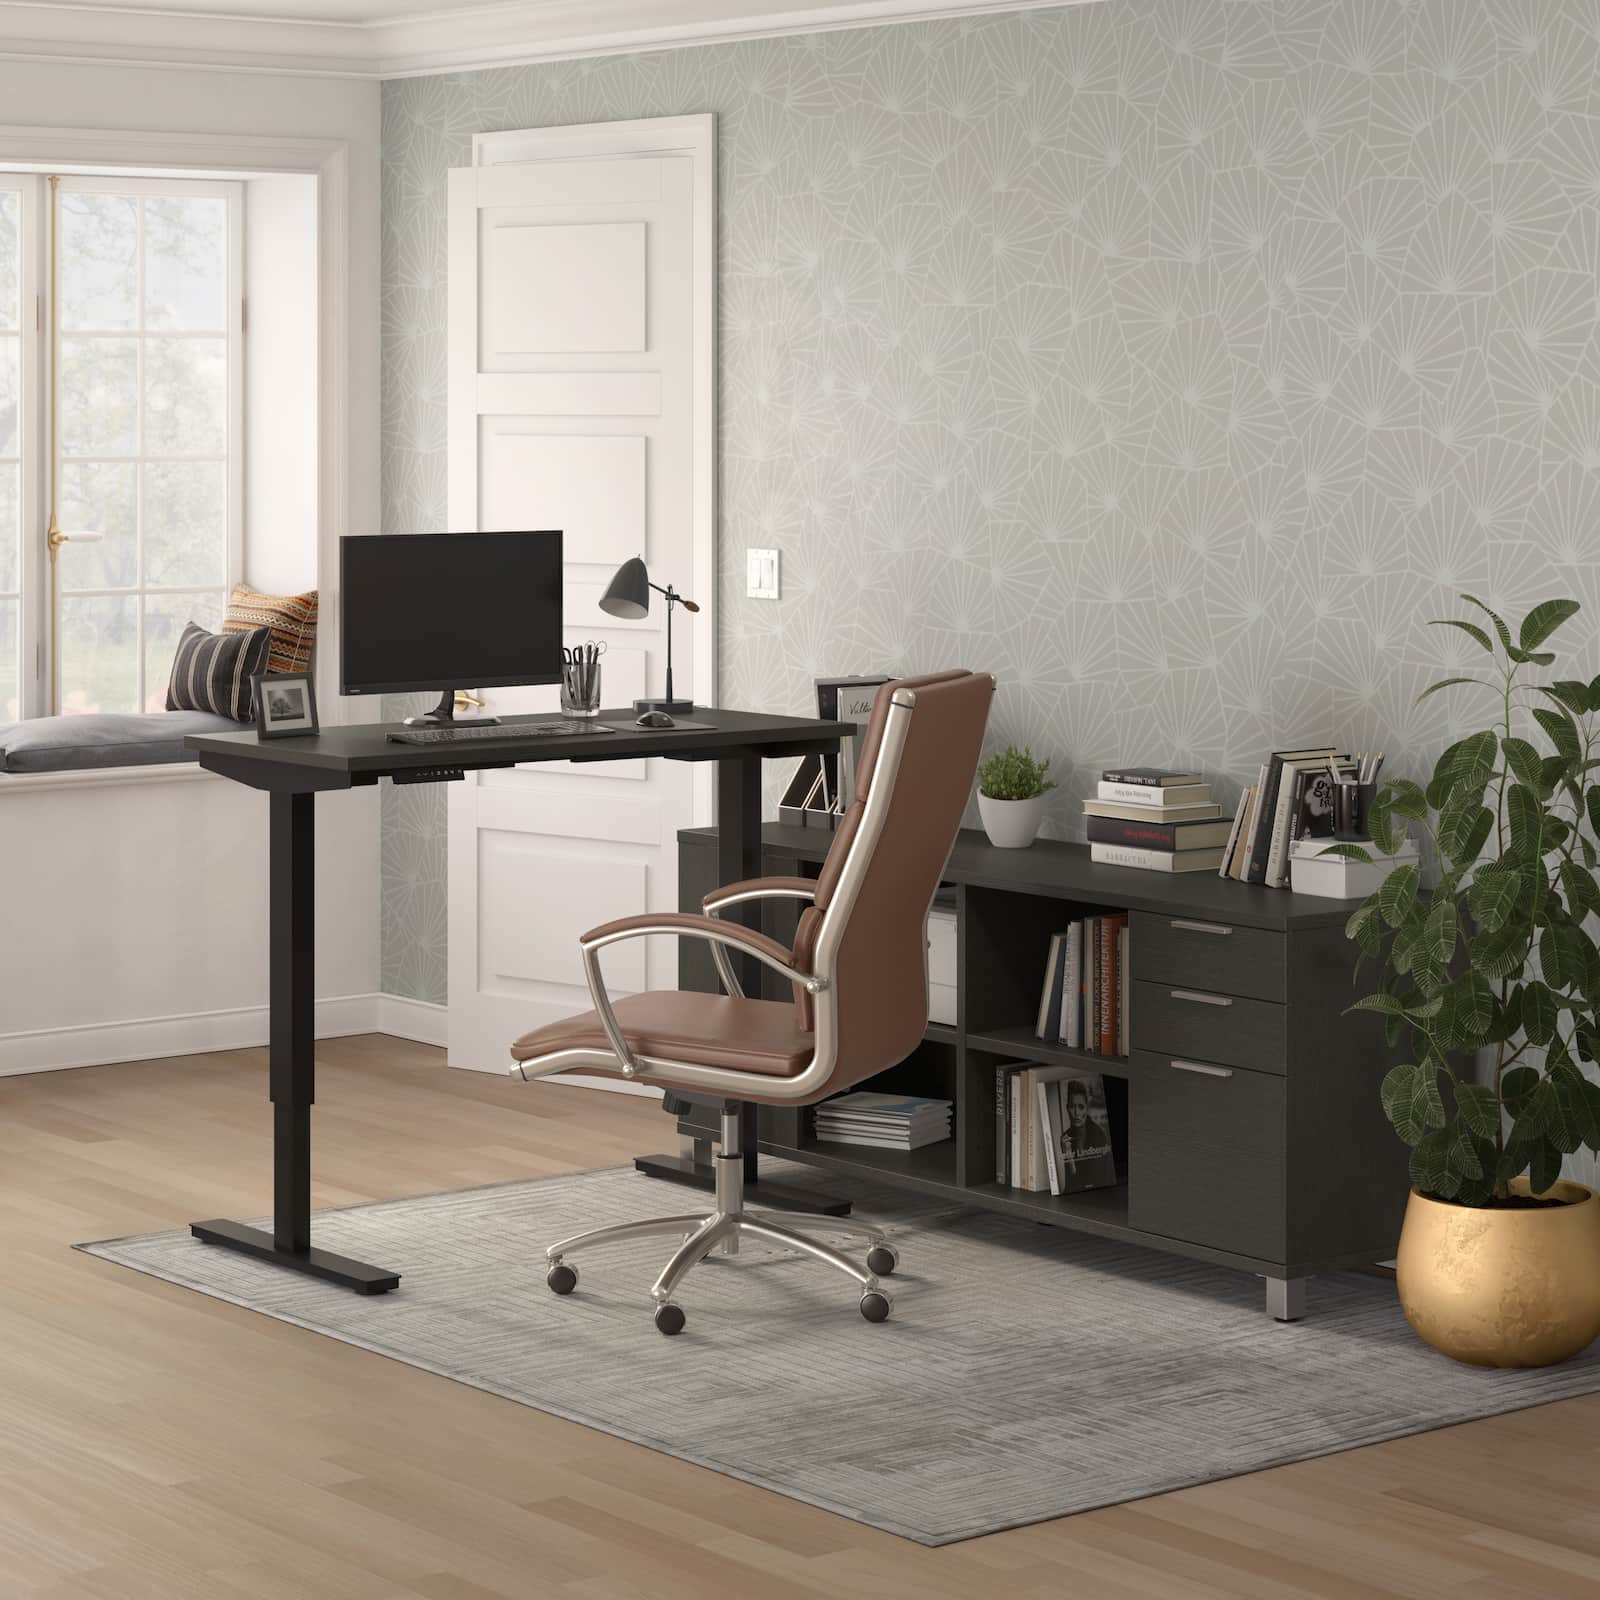 Ways to Create Space in Your Small Home Office - Bestar